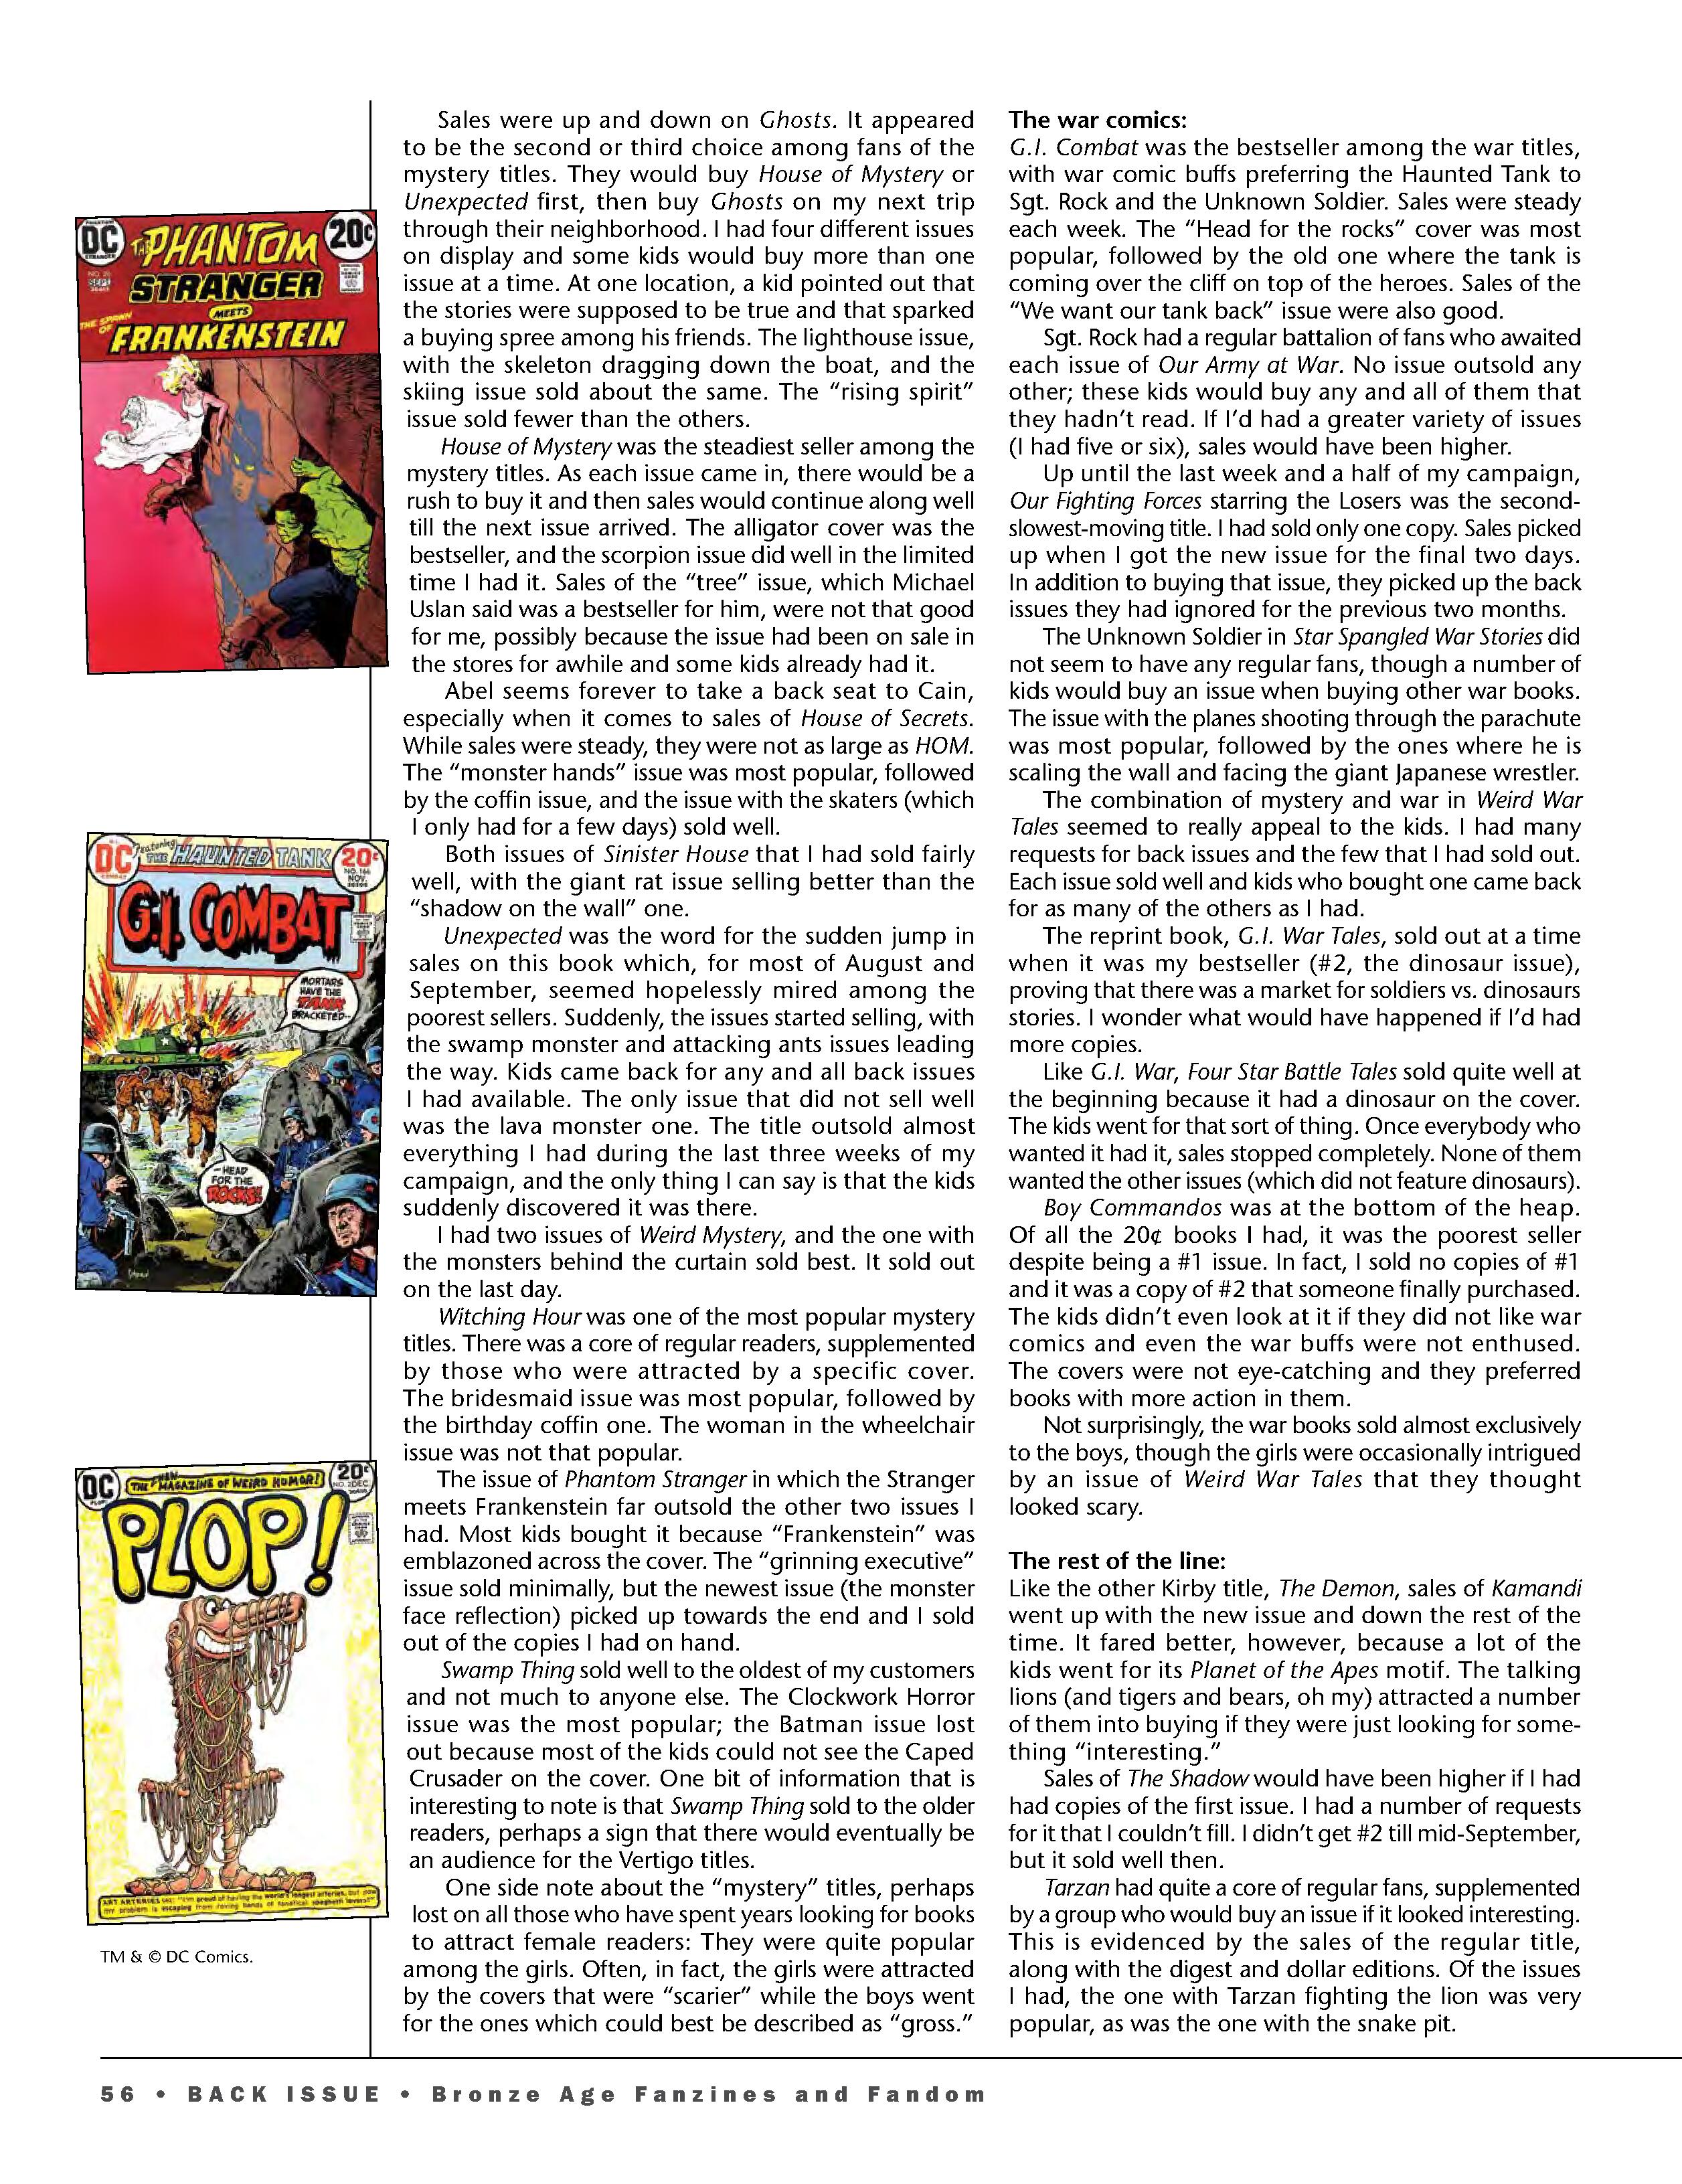 Read online Back Issue comic -  Issue #100 - 58